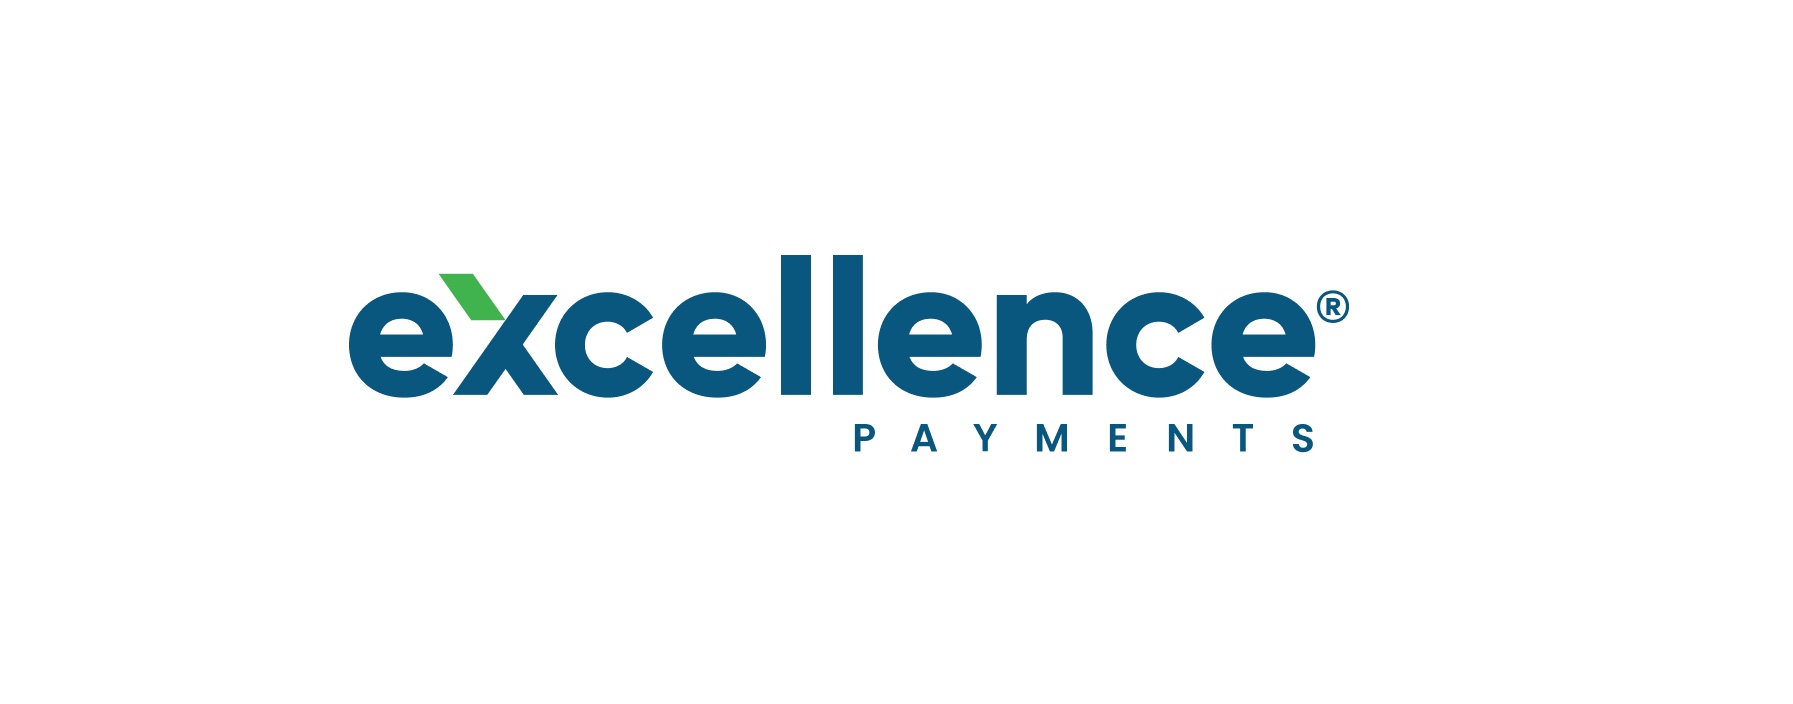 Nasce Excellence Payments